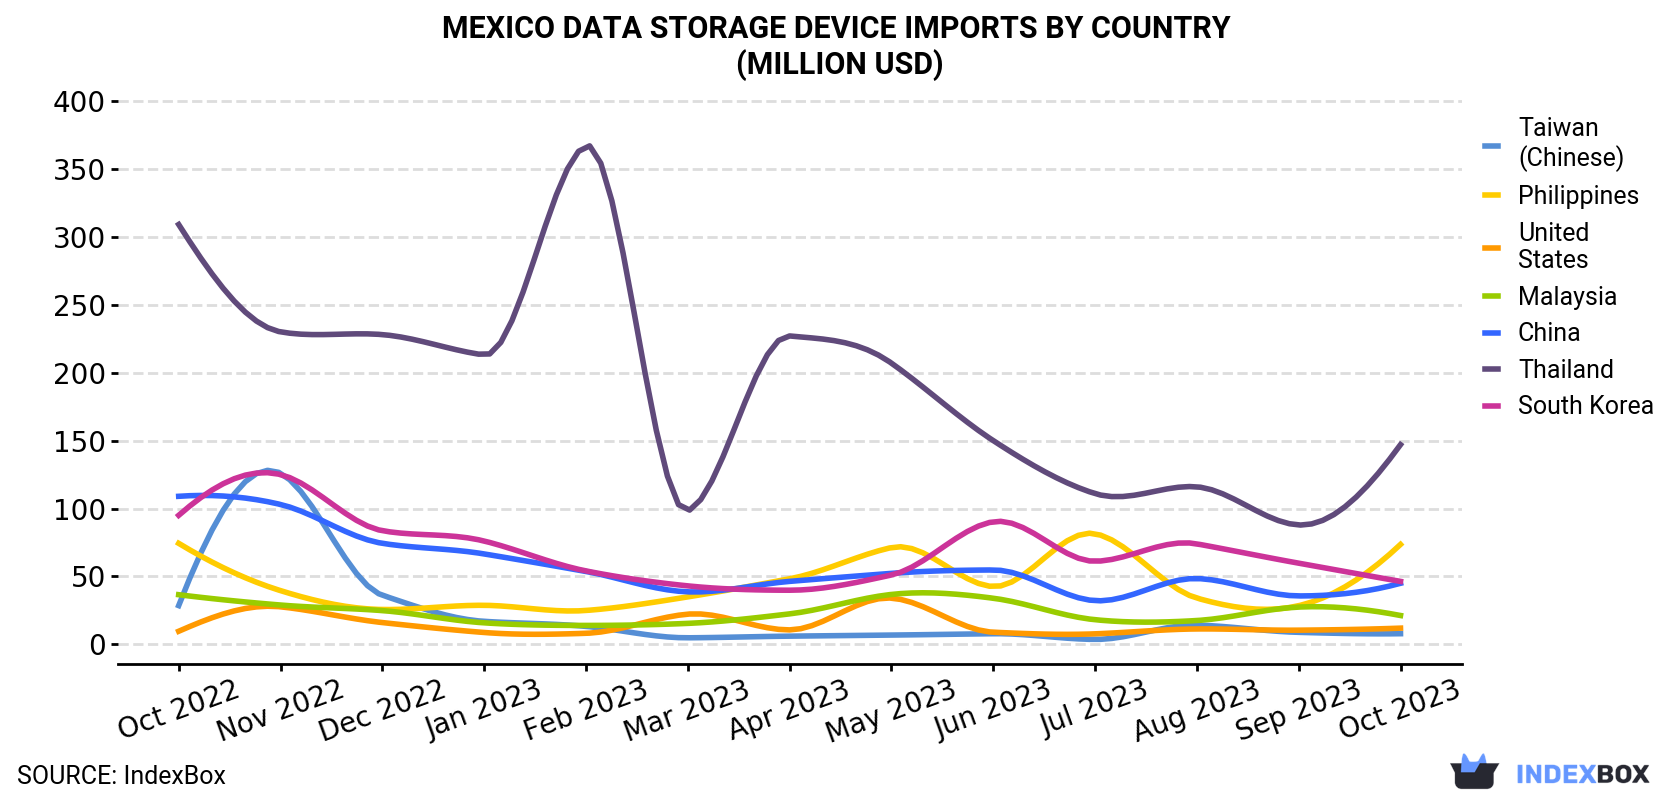 Mexico Data Storage Device Imports By Country (Million USD)